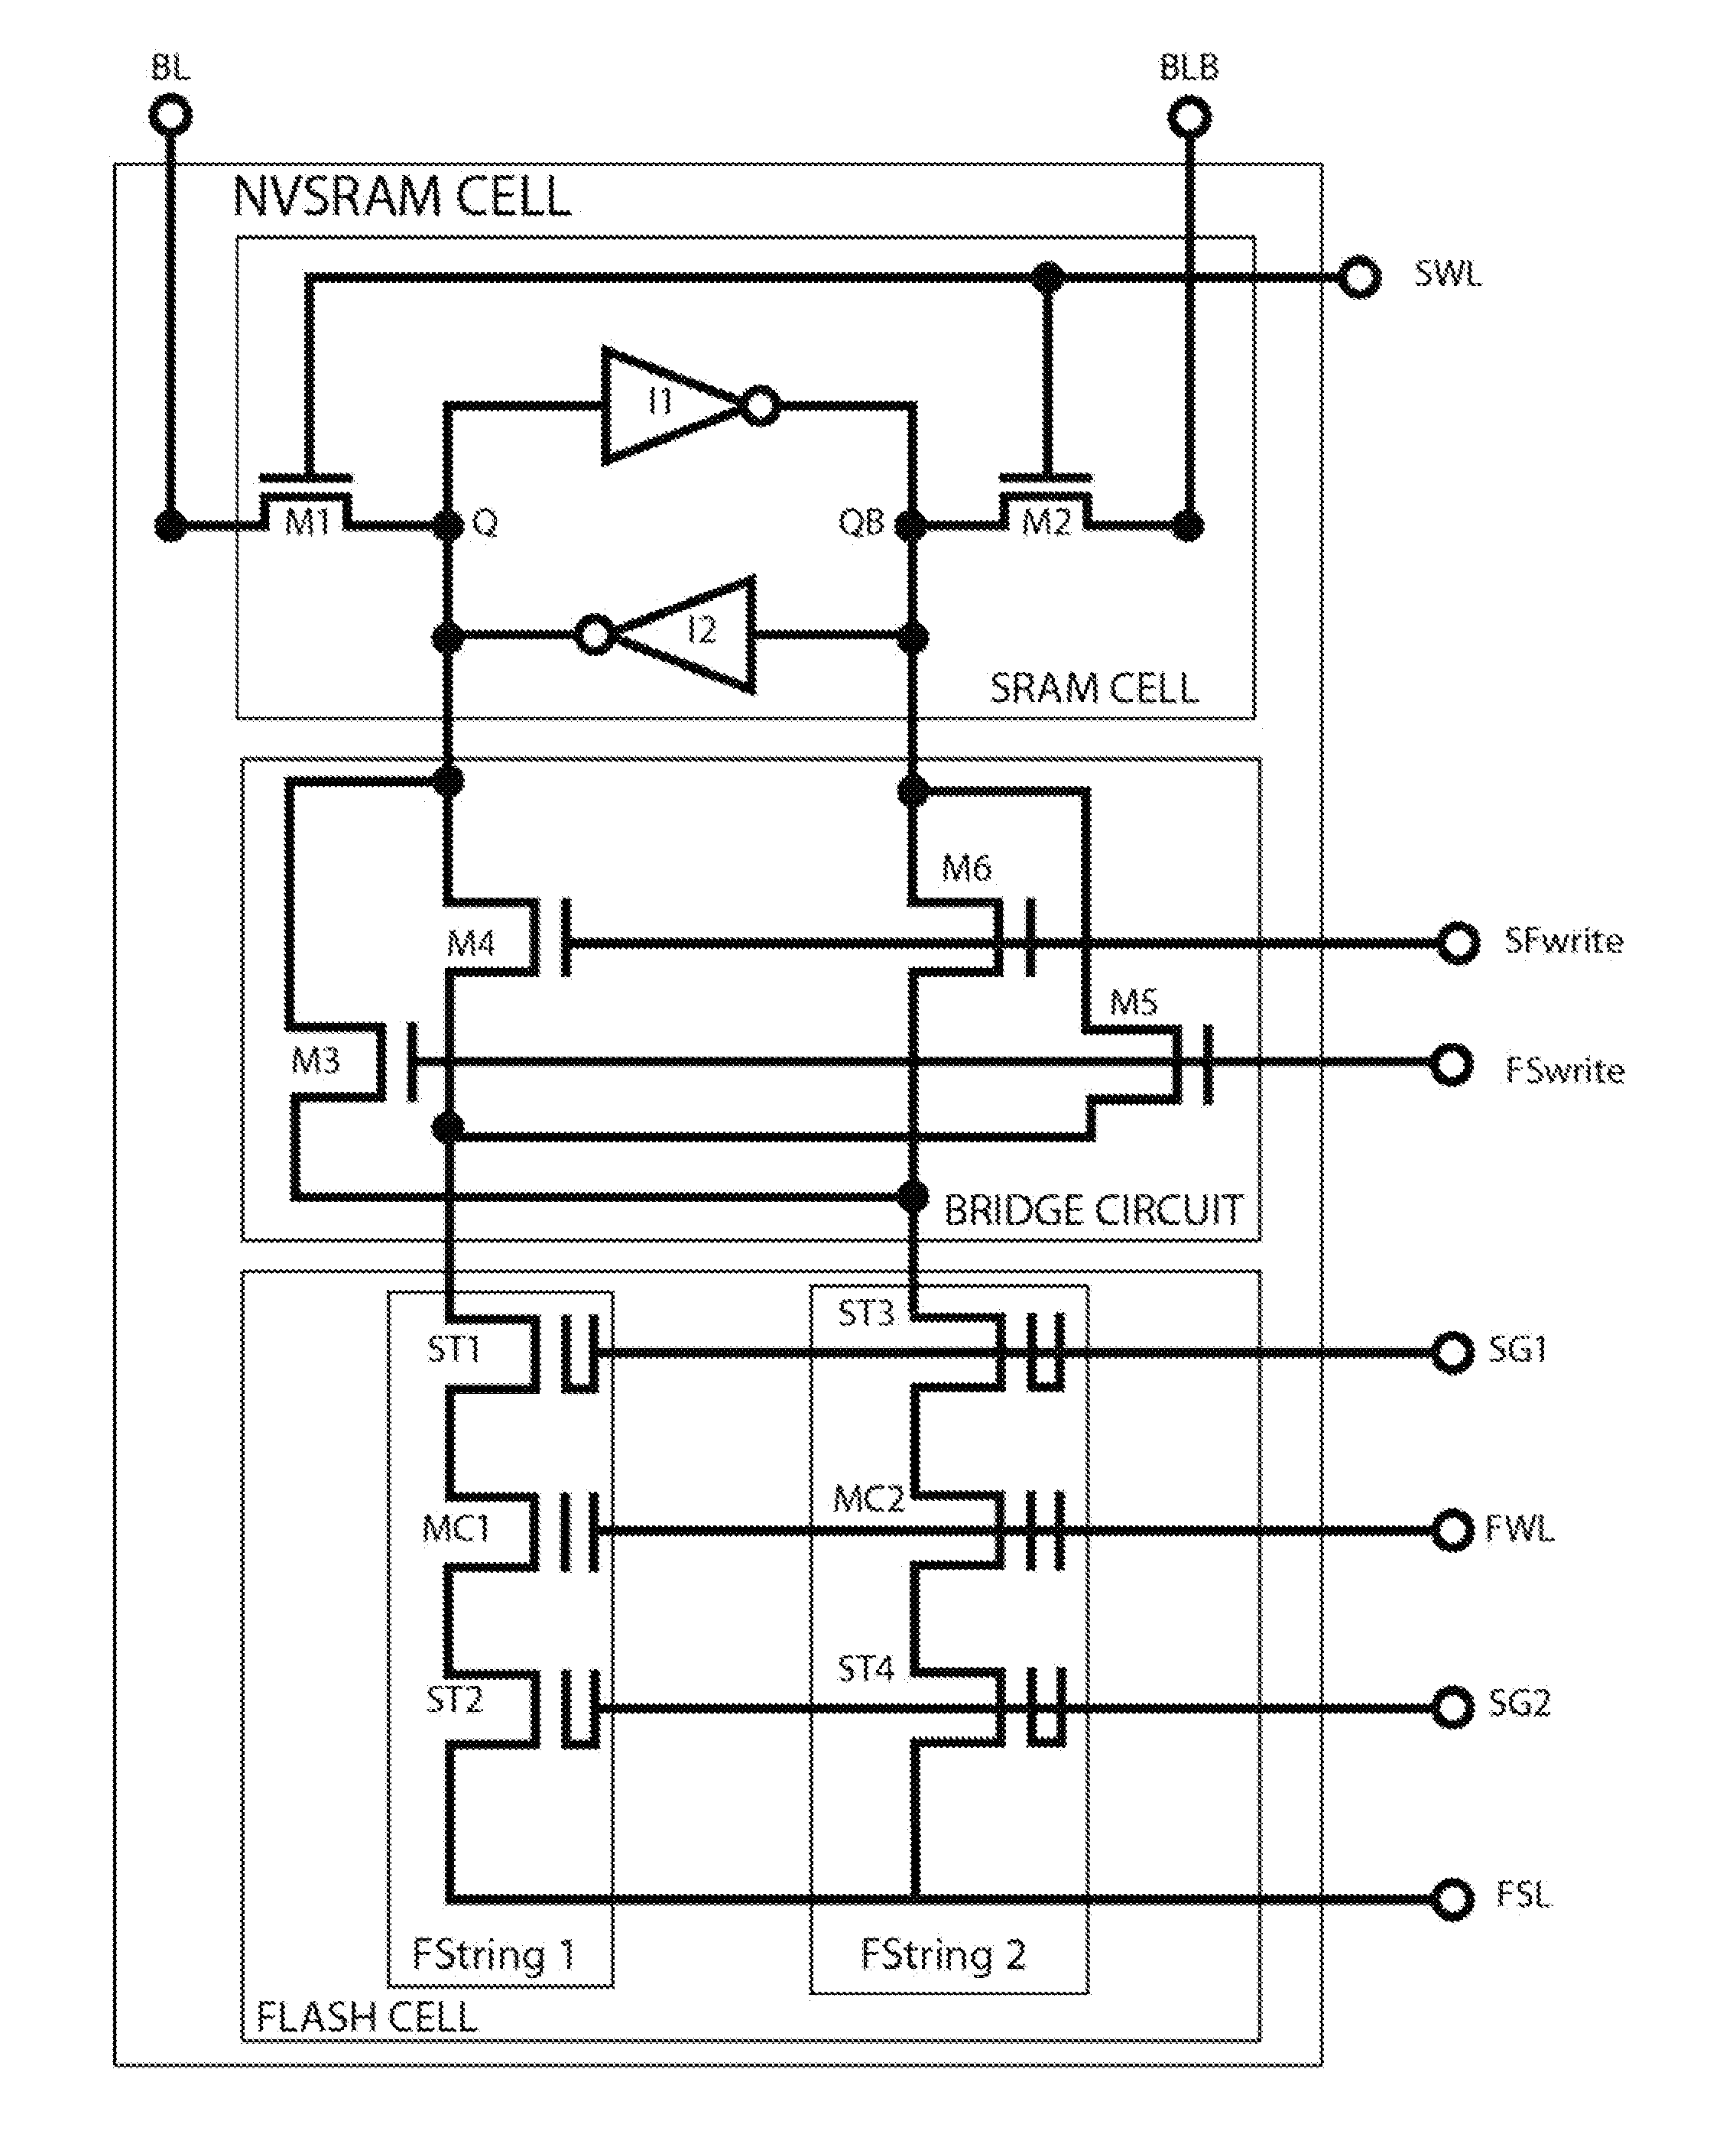 Low-voltage fast-write nvsram cell